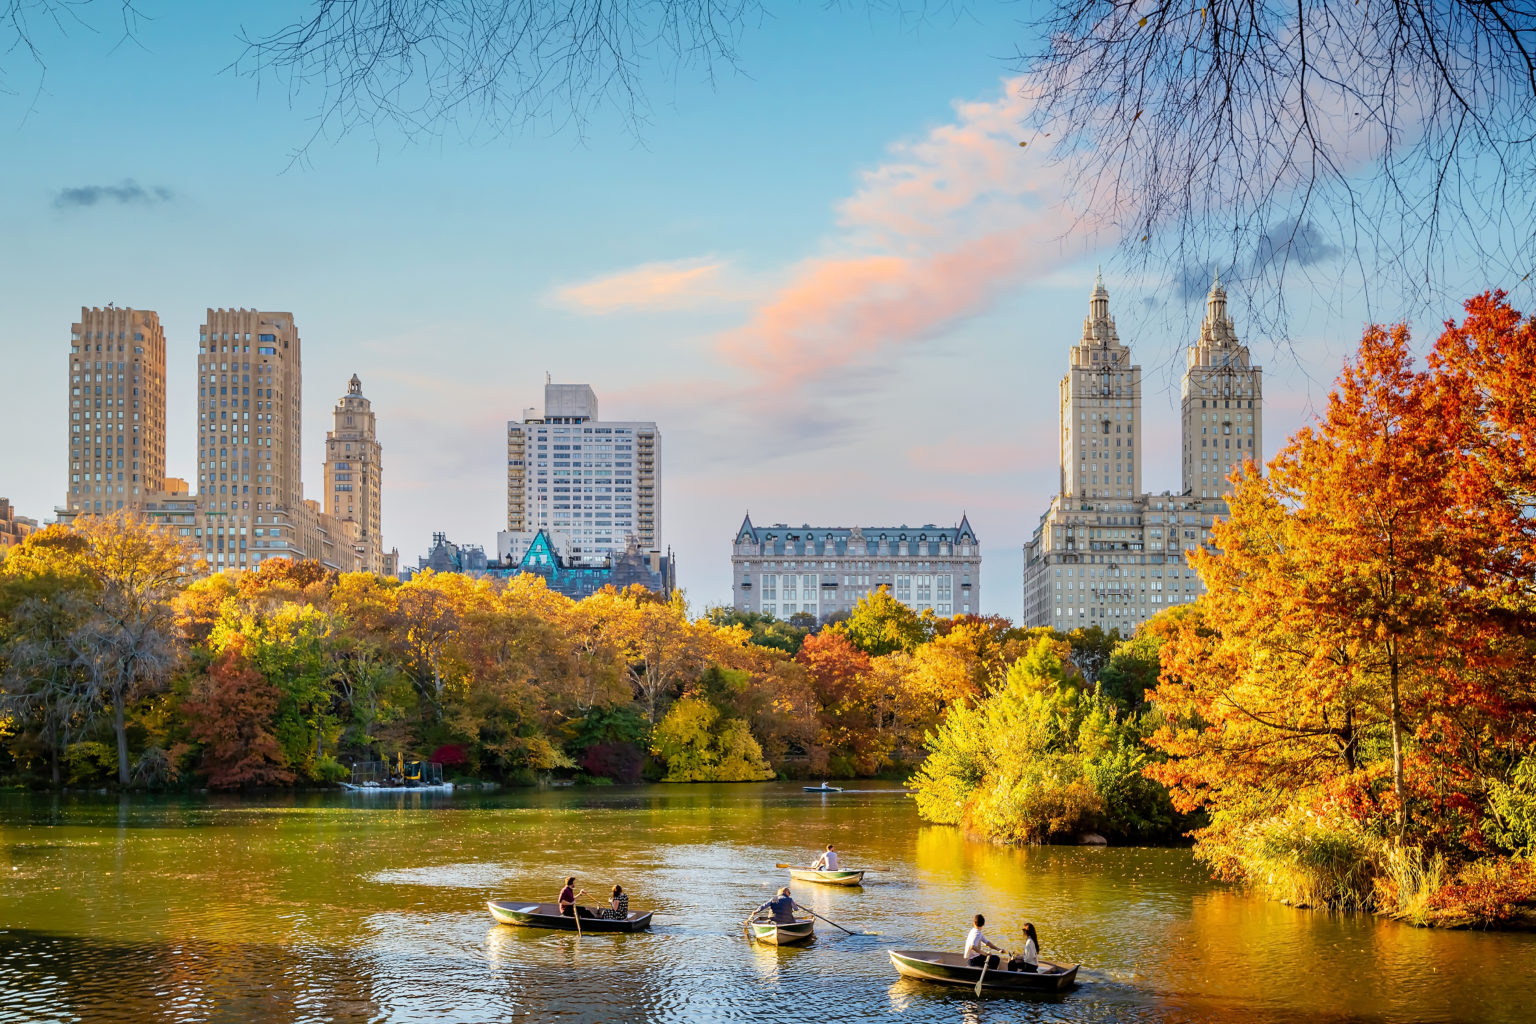 The 7 Best U.S. Cities and Towns to See Fall Foliage | SmarterTravel